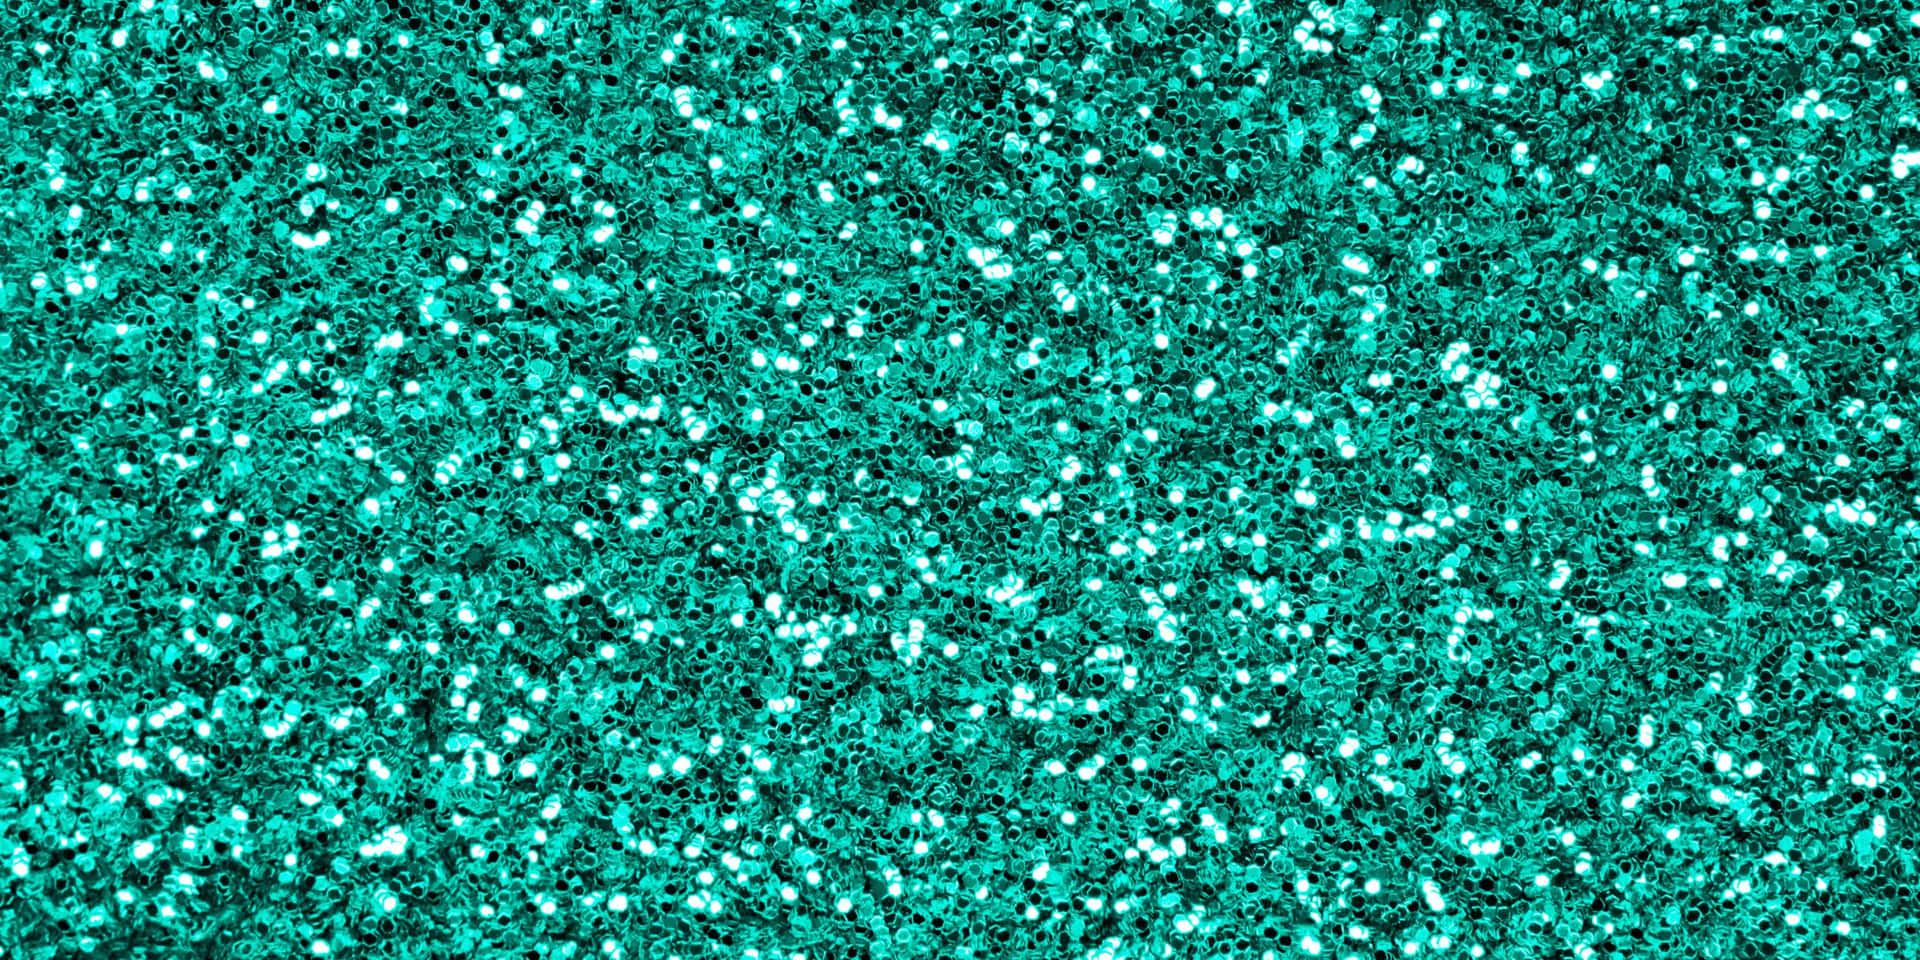 Sparkle up your life with teal glitter